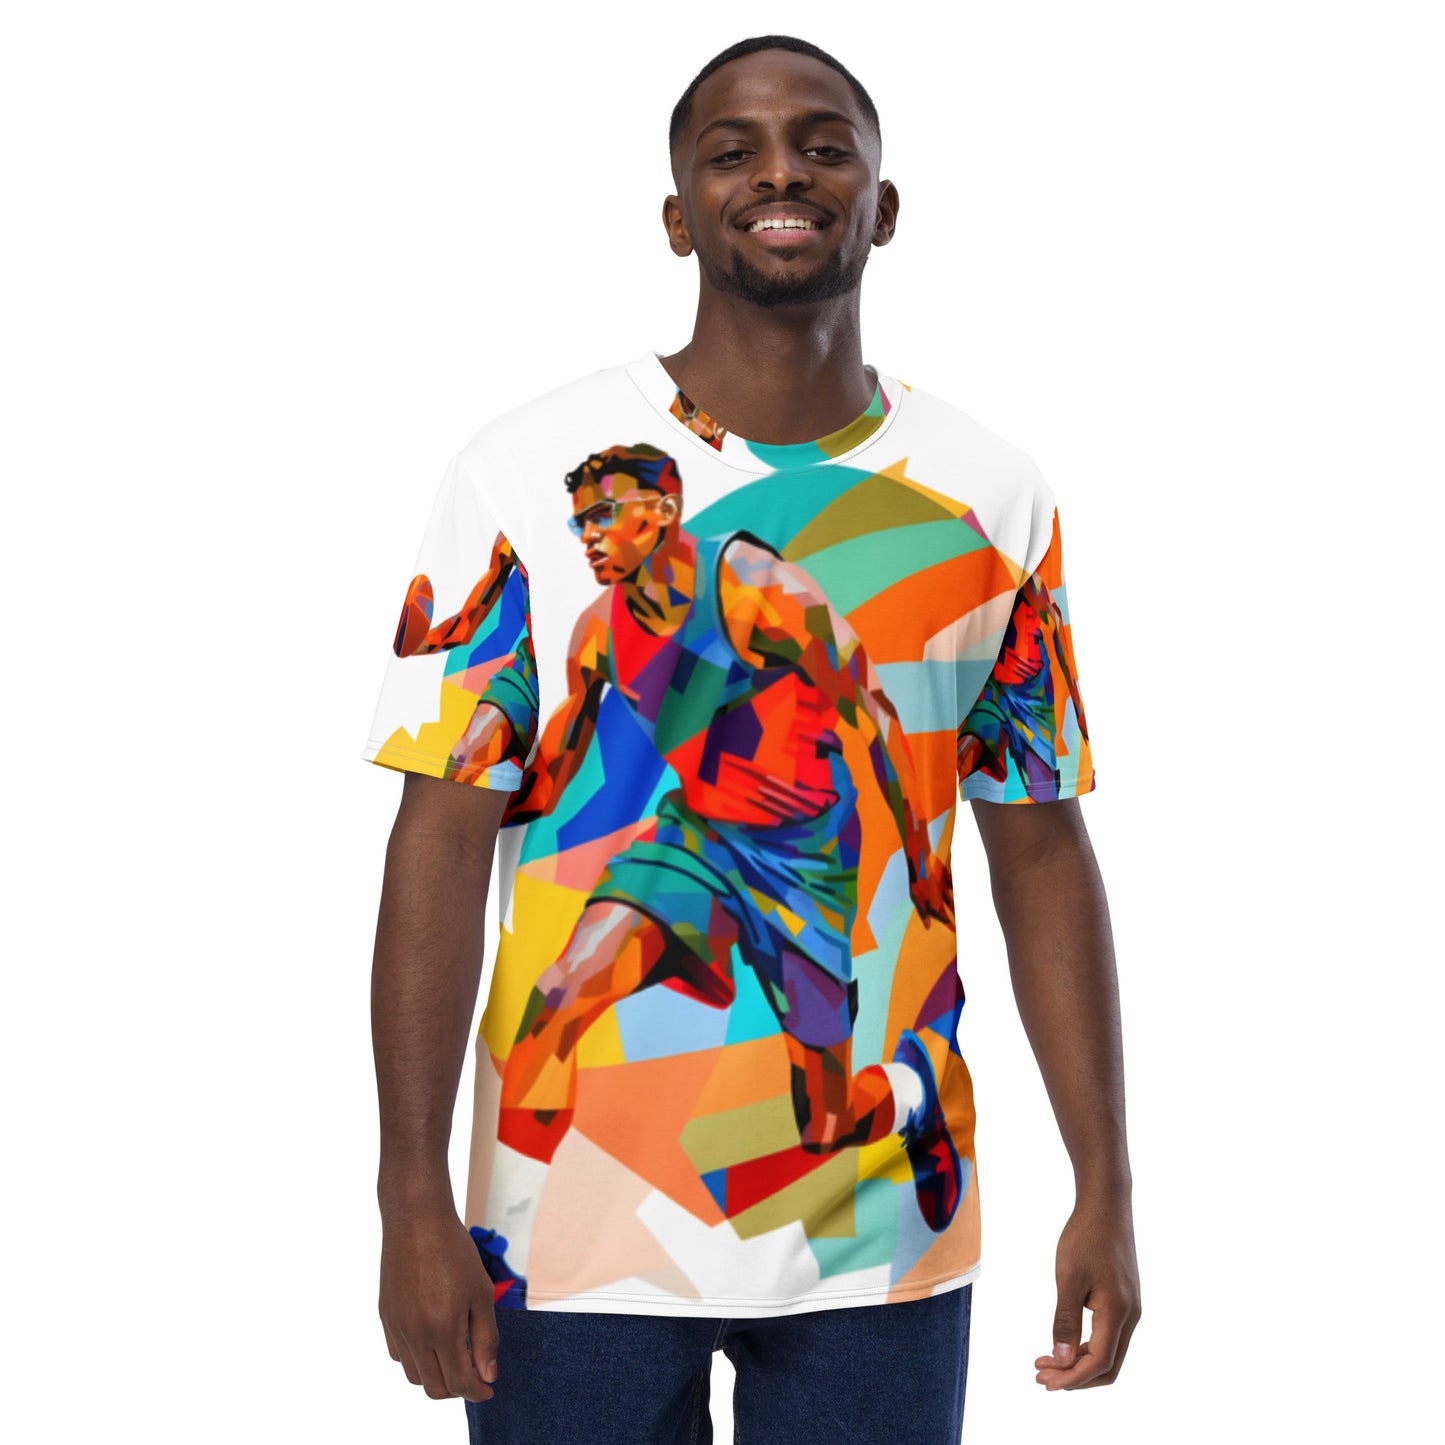 T-Shirt "Basketball Player" for Daddys